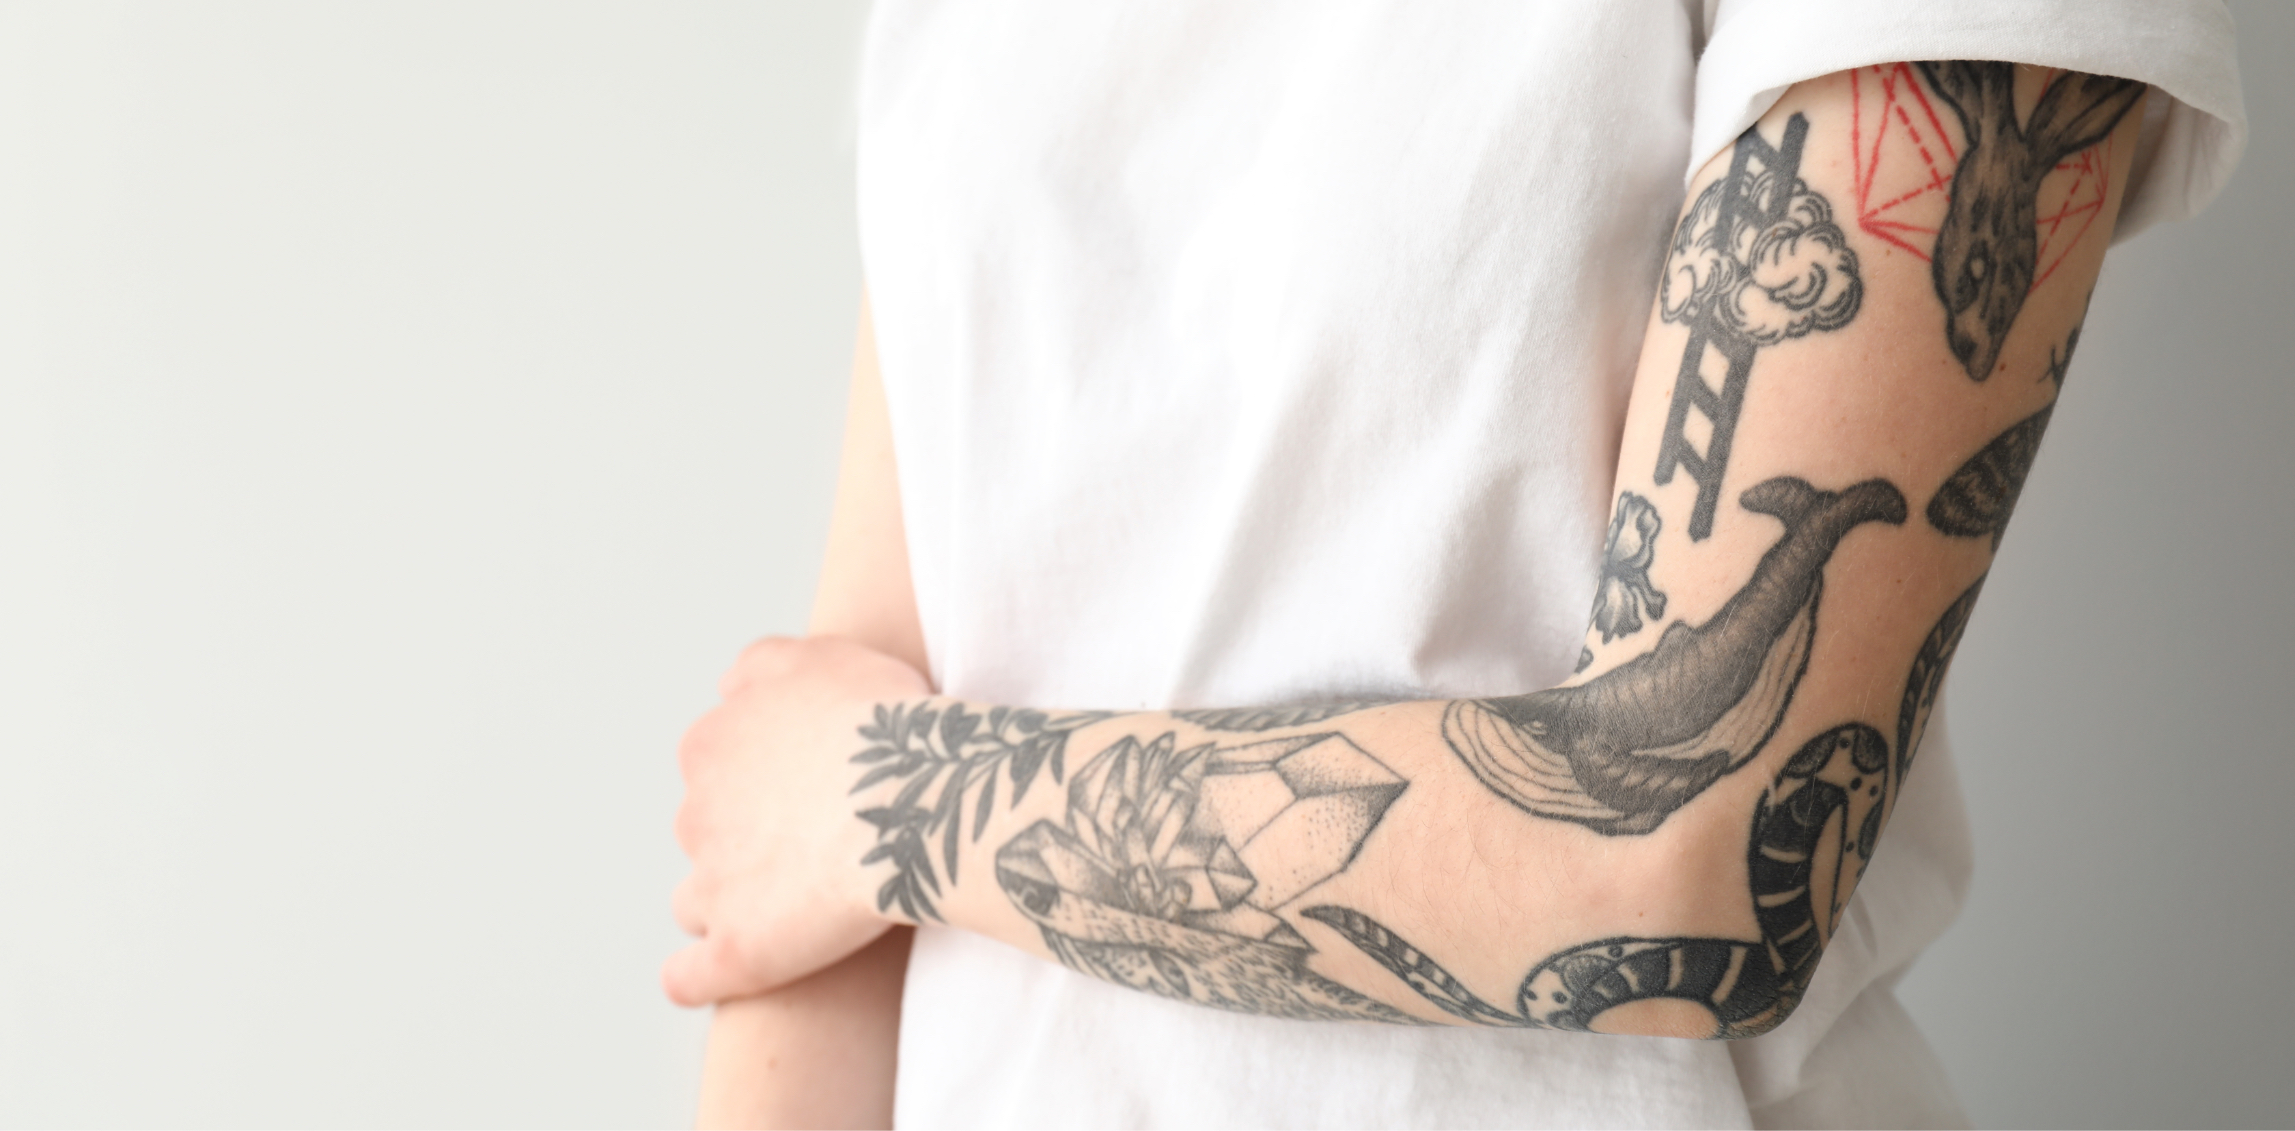 Photo of a tattoos on a woman's arm